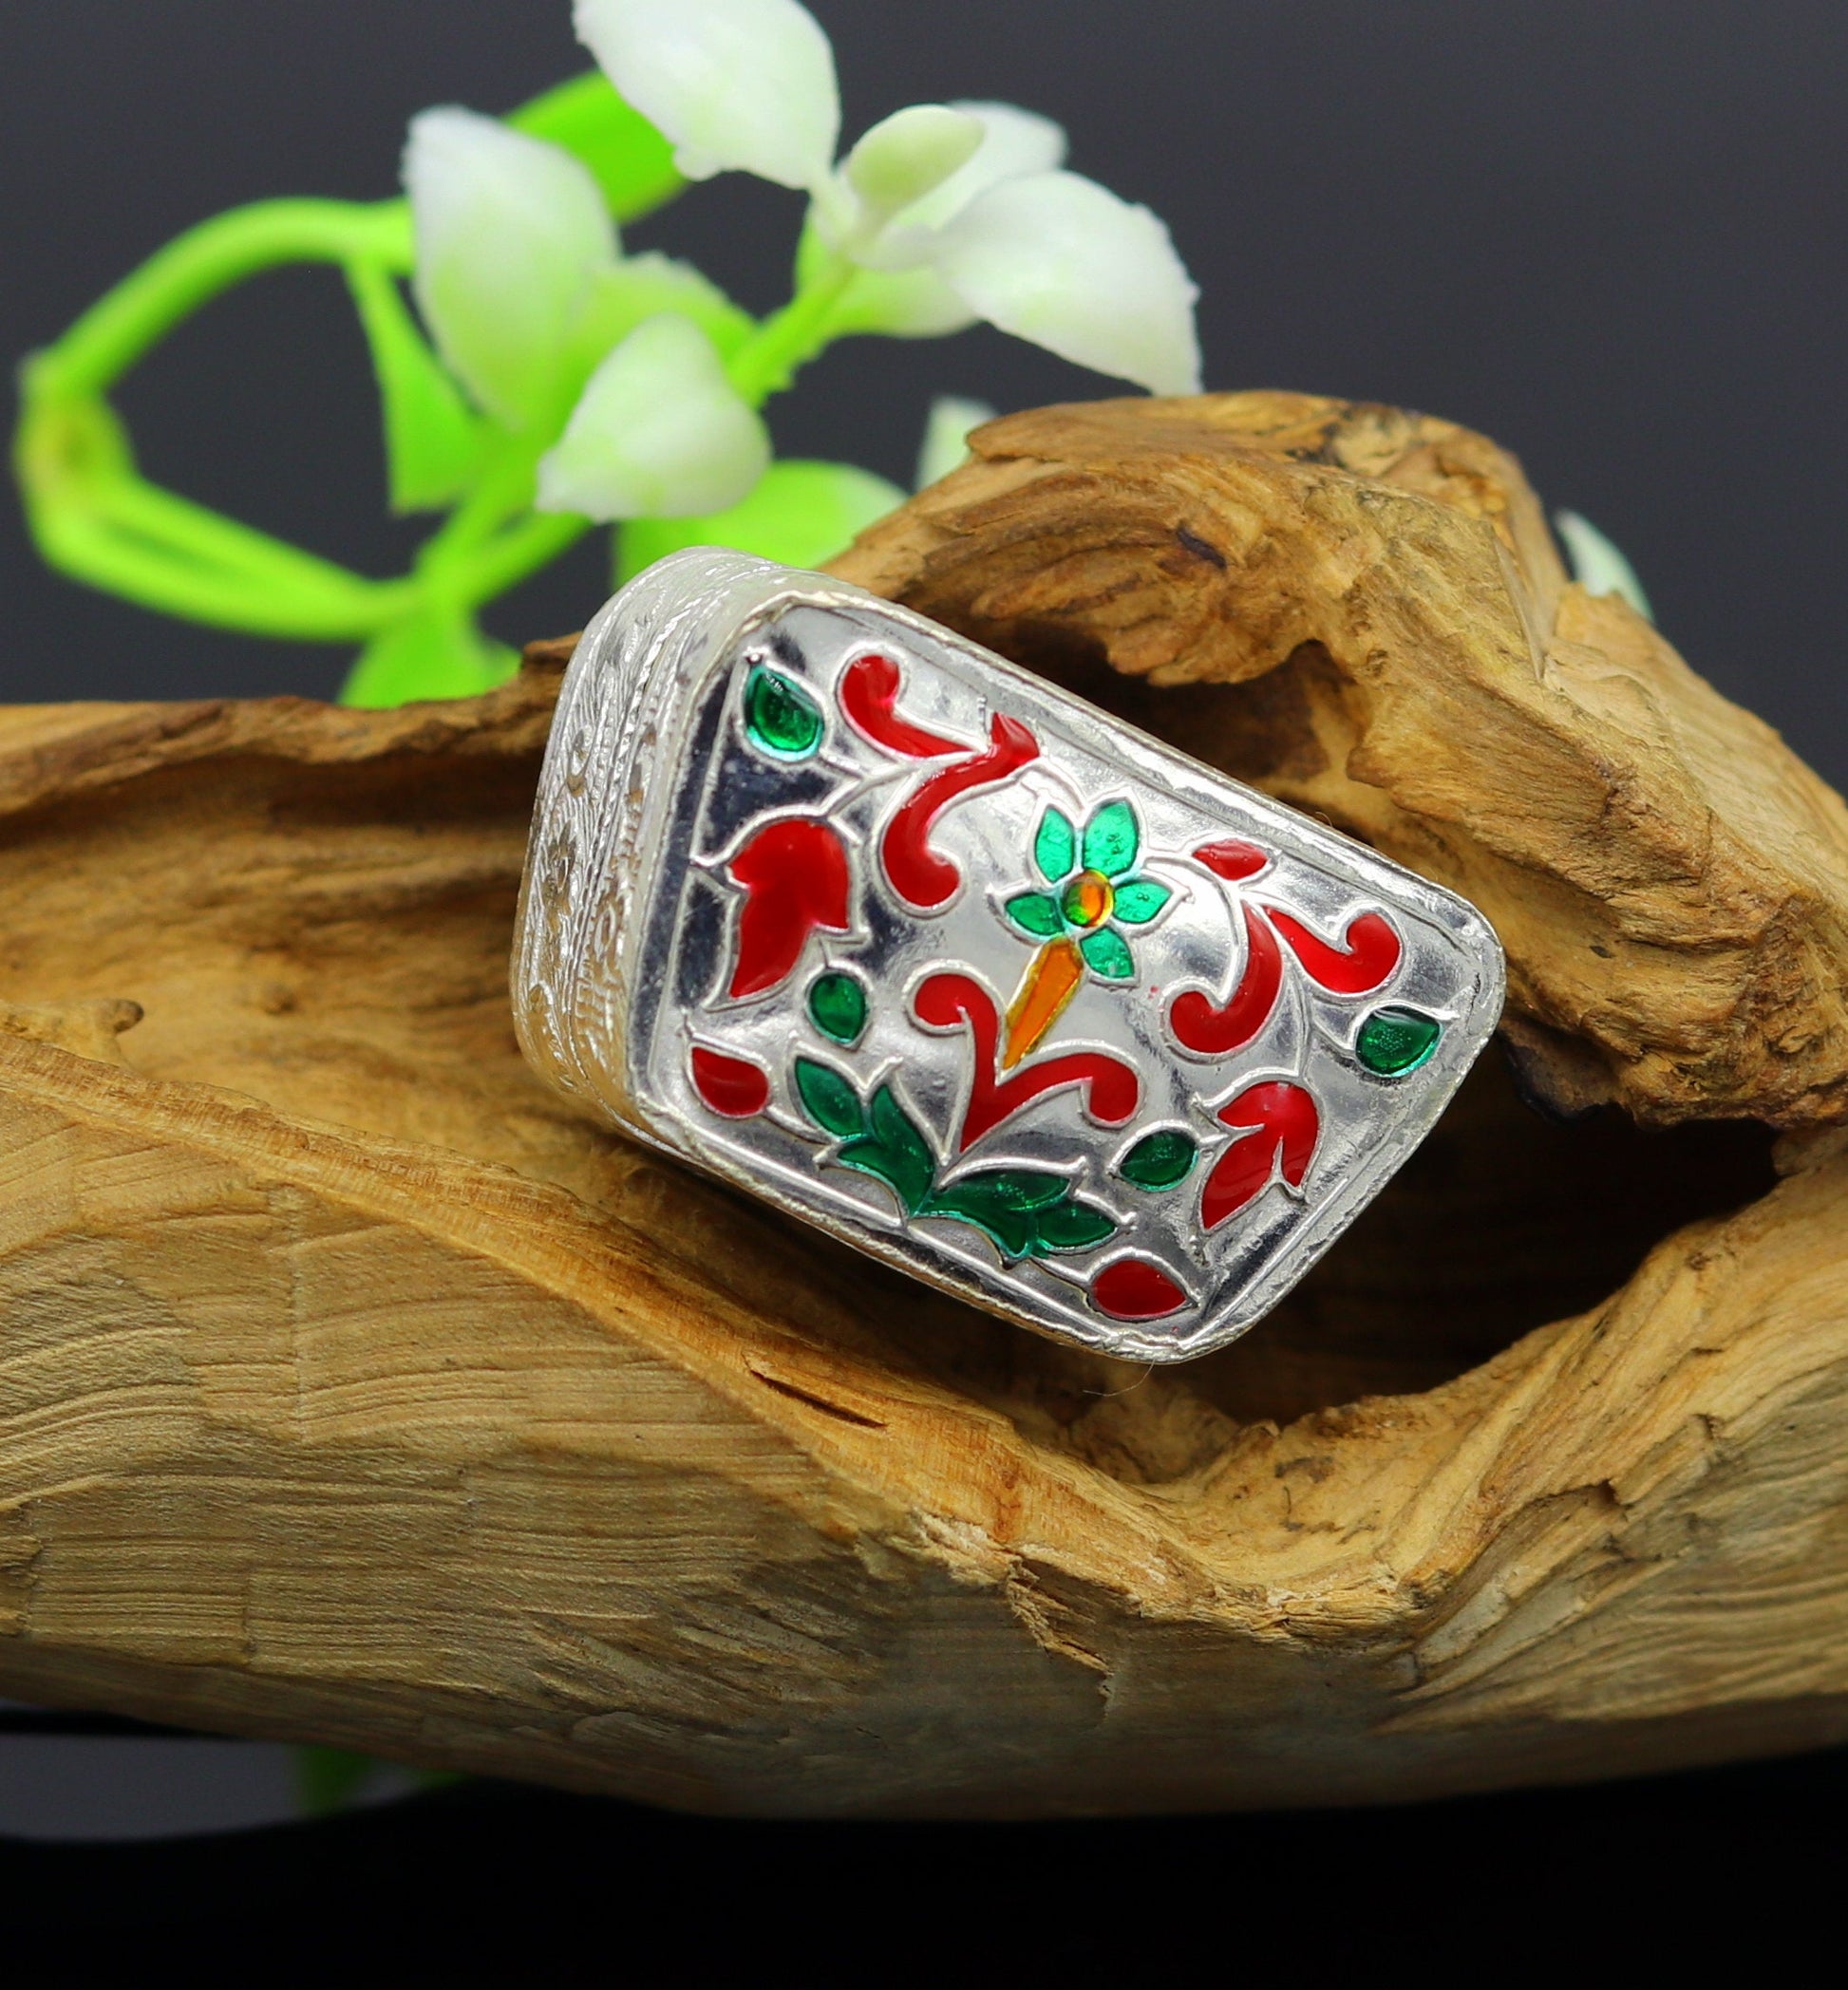 Enamel floral work 925 solid silver utensils trinket box, casket box, container box, jewelry box, silver utensils, vessels bridal gift stb60 - TRIBAL ORNAMENTS